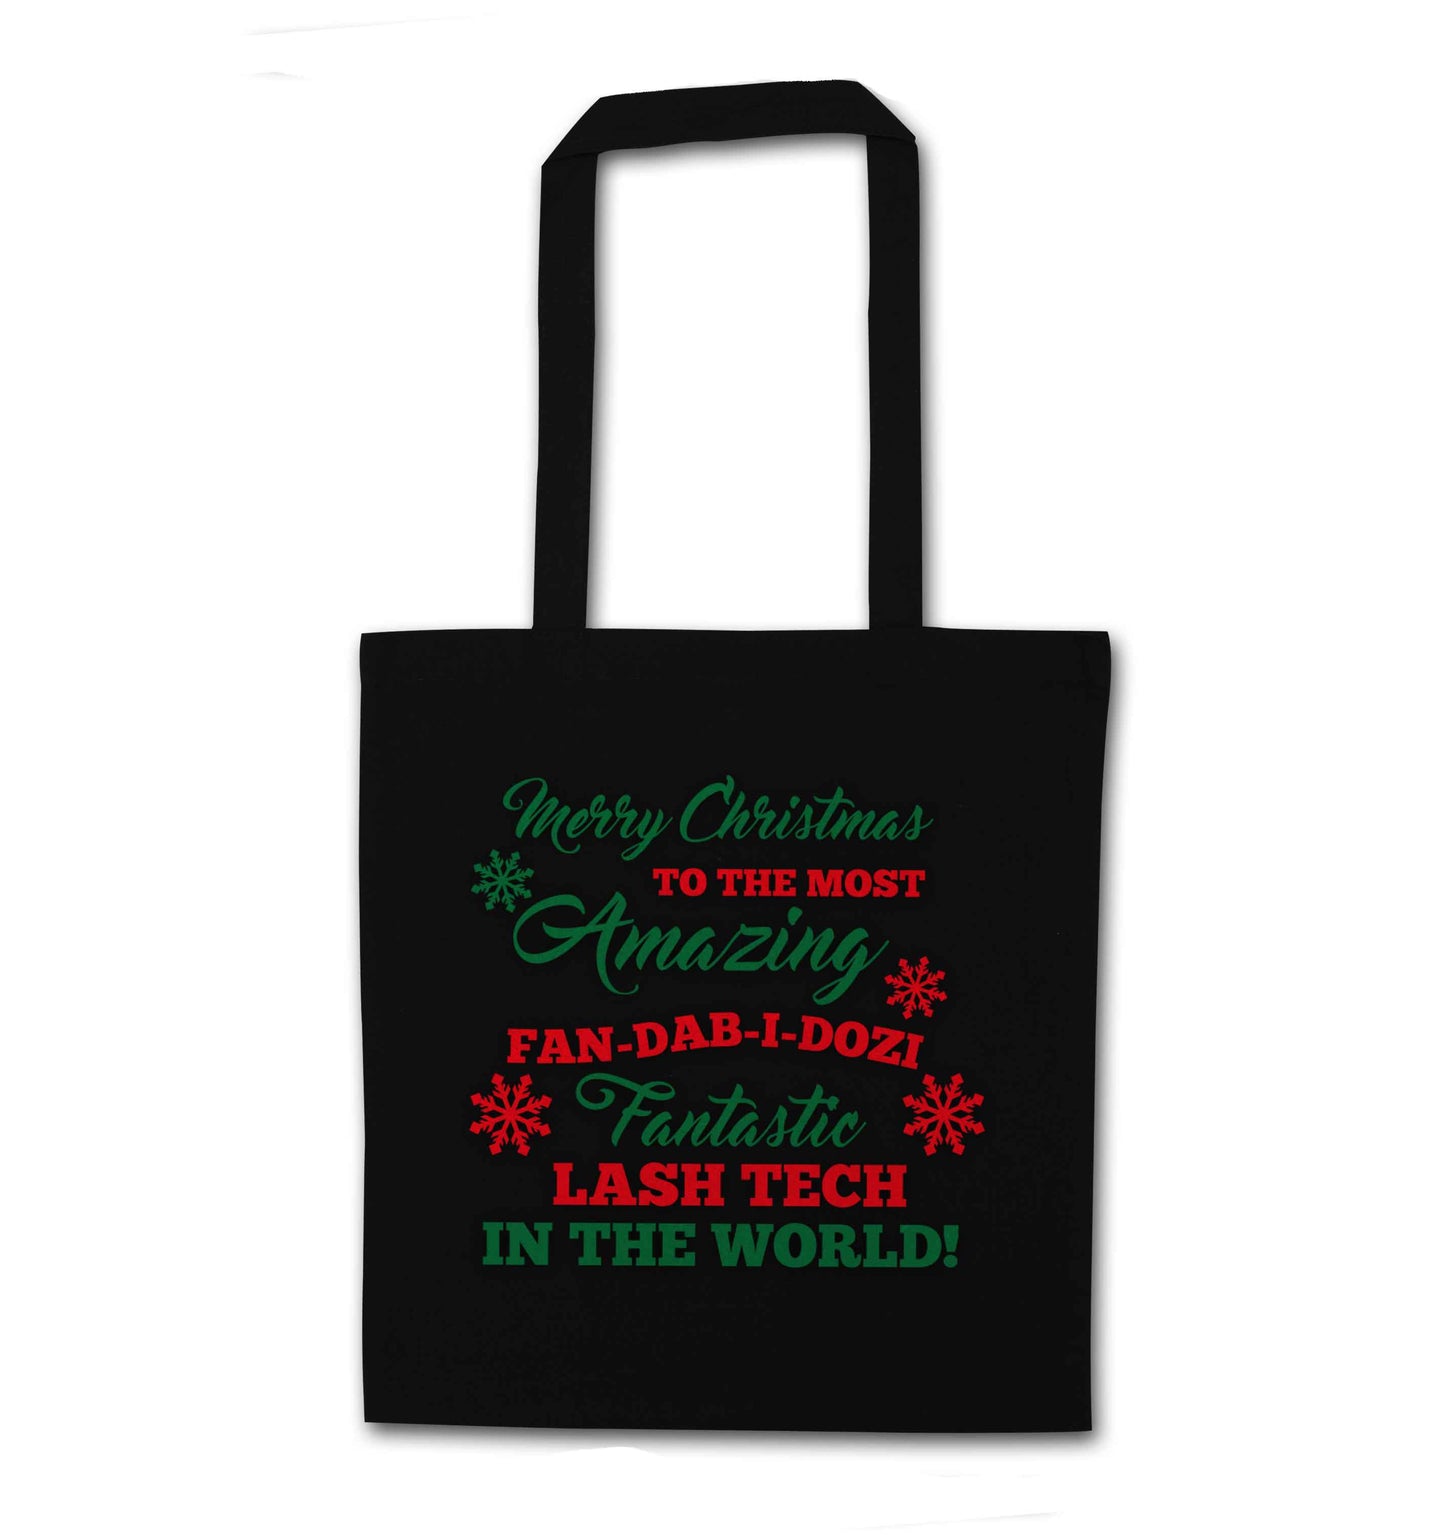 Merry Christmas to the most amazing fan-dab-i-dozi fantasic lash tech in the world black tote bag